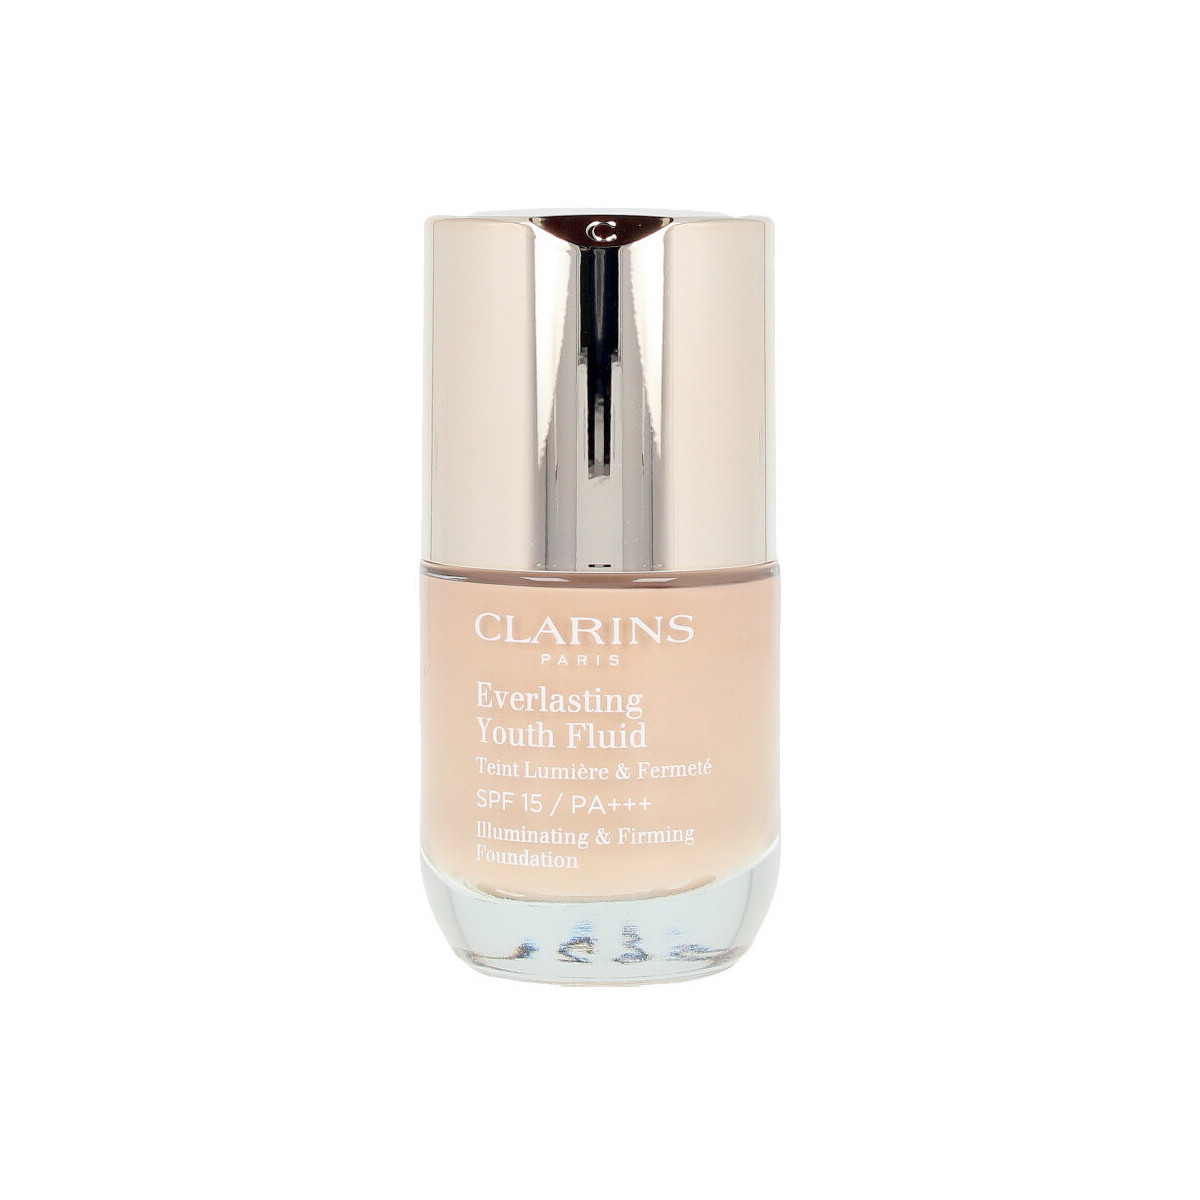 Beauty Make-up & Foundation  Clarins Everlasting Youth Fluid 109 -wheat 